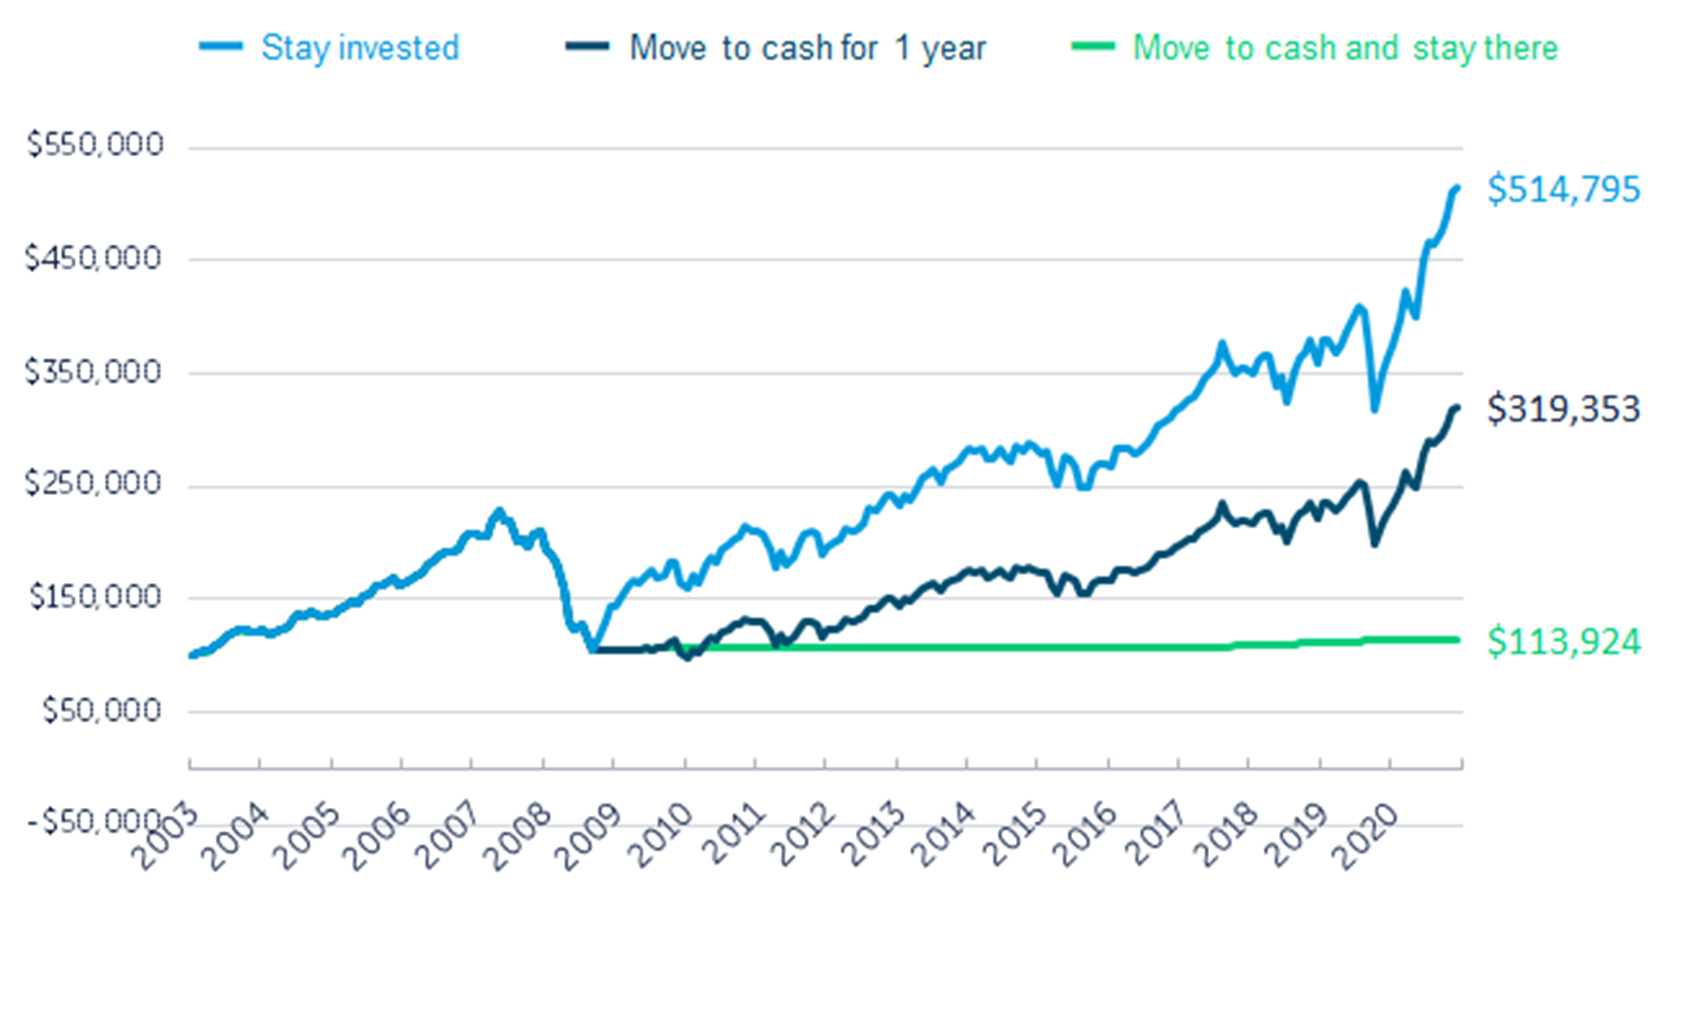 Line graph depicting 'Stay invested,' 'Move to cash for 1 year,' and 'Move to cash and stay there' from 2003 to 2020